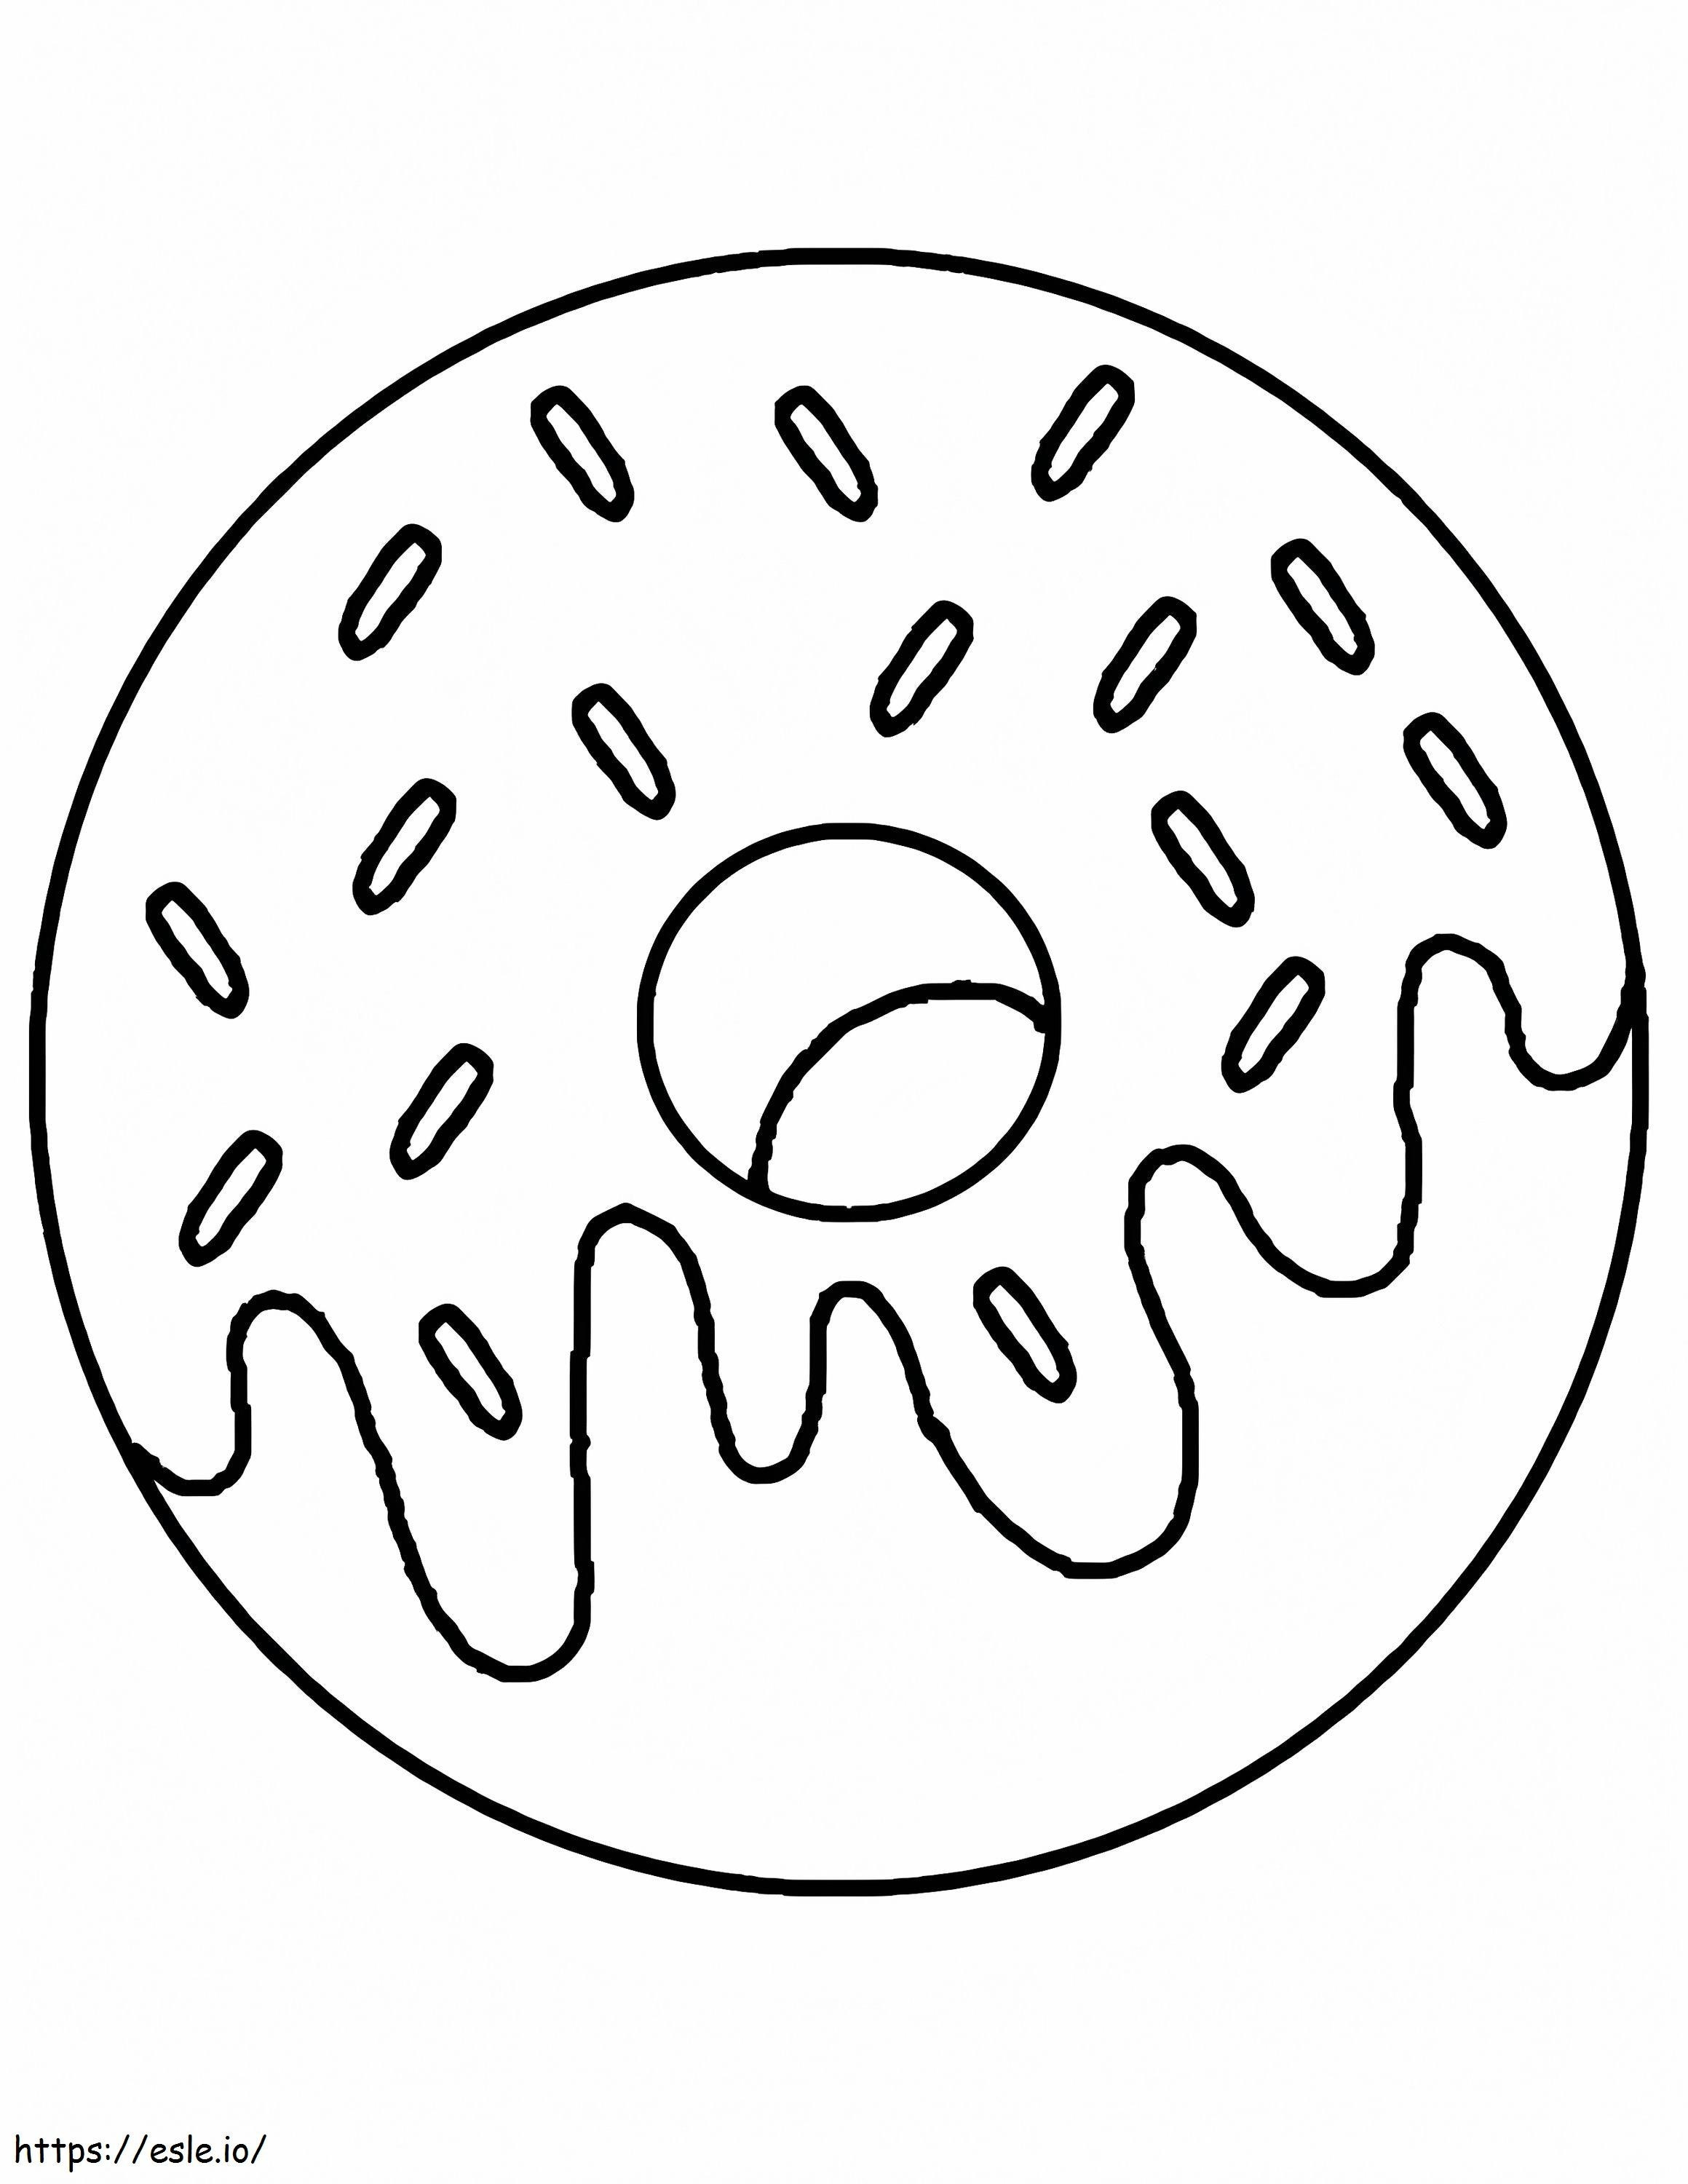 Basic Donut coloring page